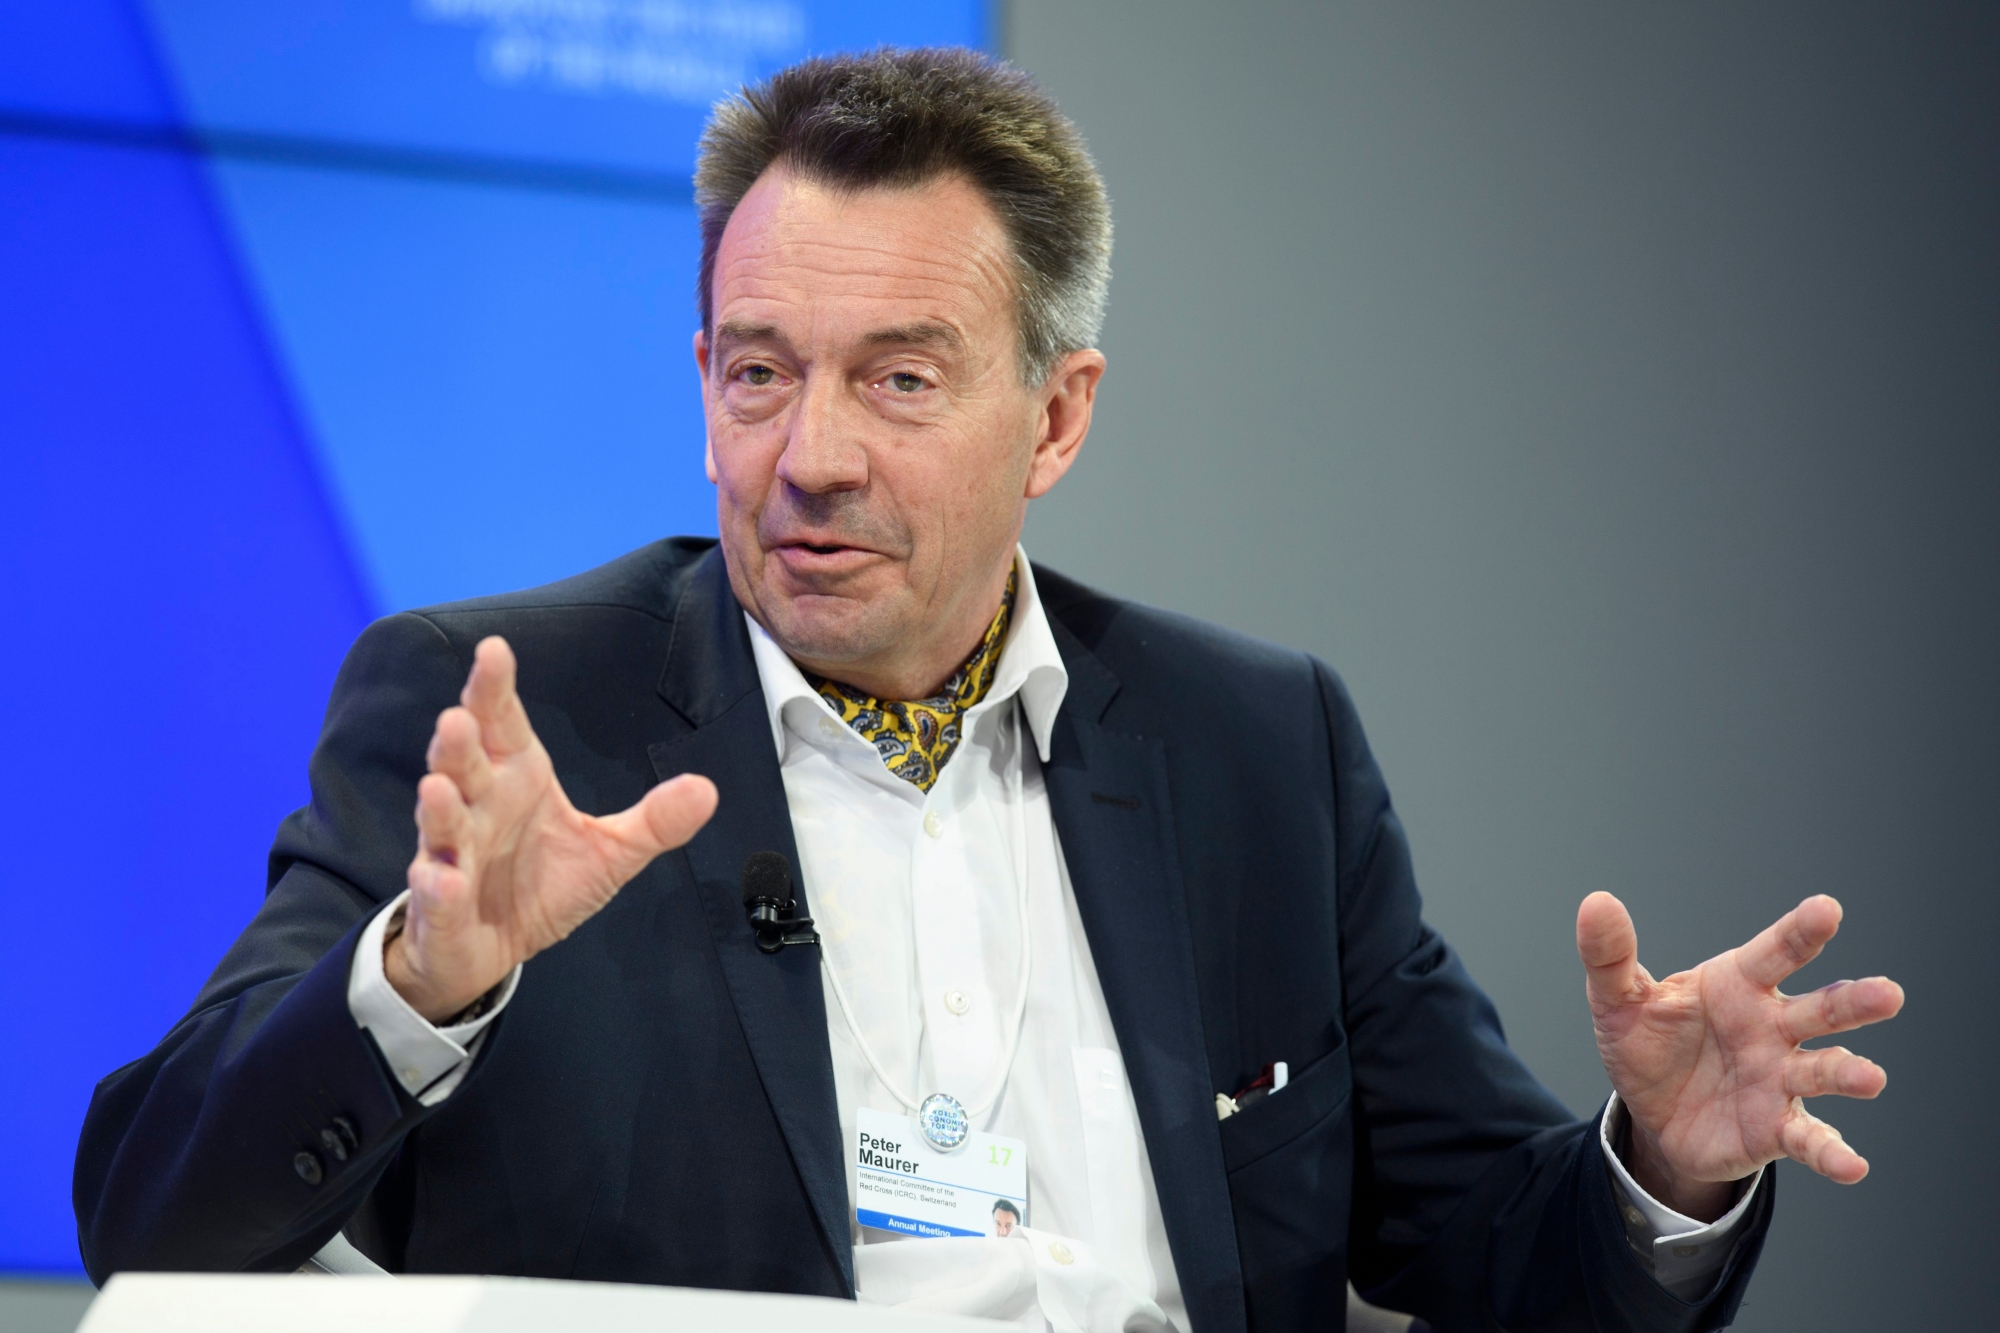 Peter Maurer, President of the International Committee of the Red Cross (ICRC), speaks during a panel session at the 47th annual meeting of the World Economic Forum, WEF, in Davos, Switzerland, Thursday, January 19, 2017. The meeting brings together enterpreneurs, scientists, chief executive and political leaders in Davos January 17 to 20. (KEYSTONE/Gian Ehrenzeller) SWITZERLAND WEF 2017 DAVOS